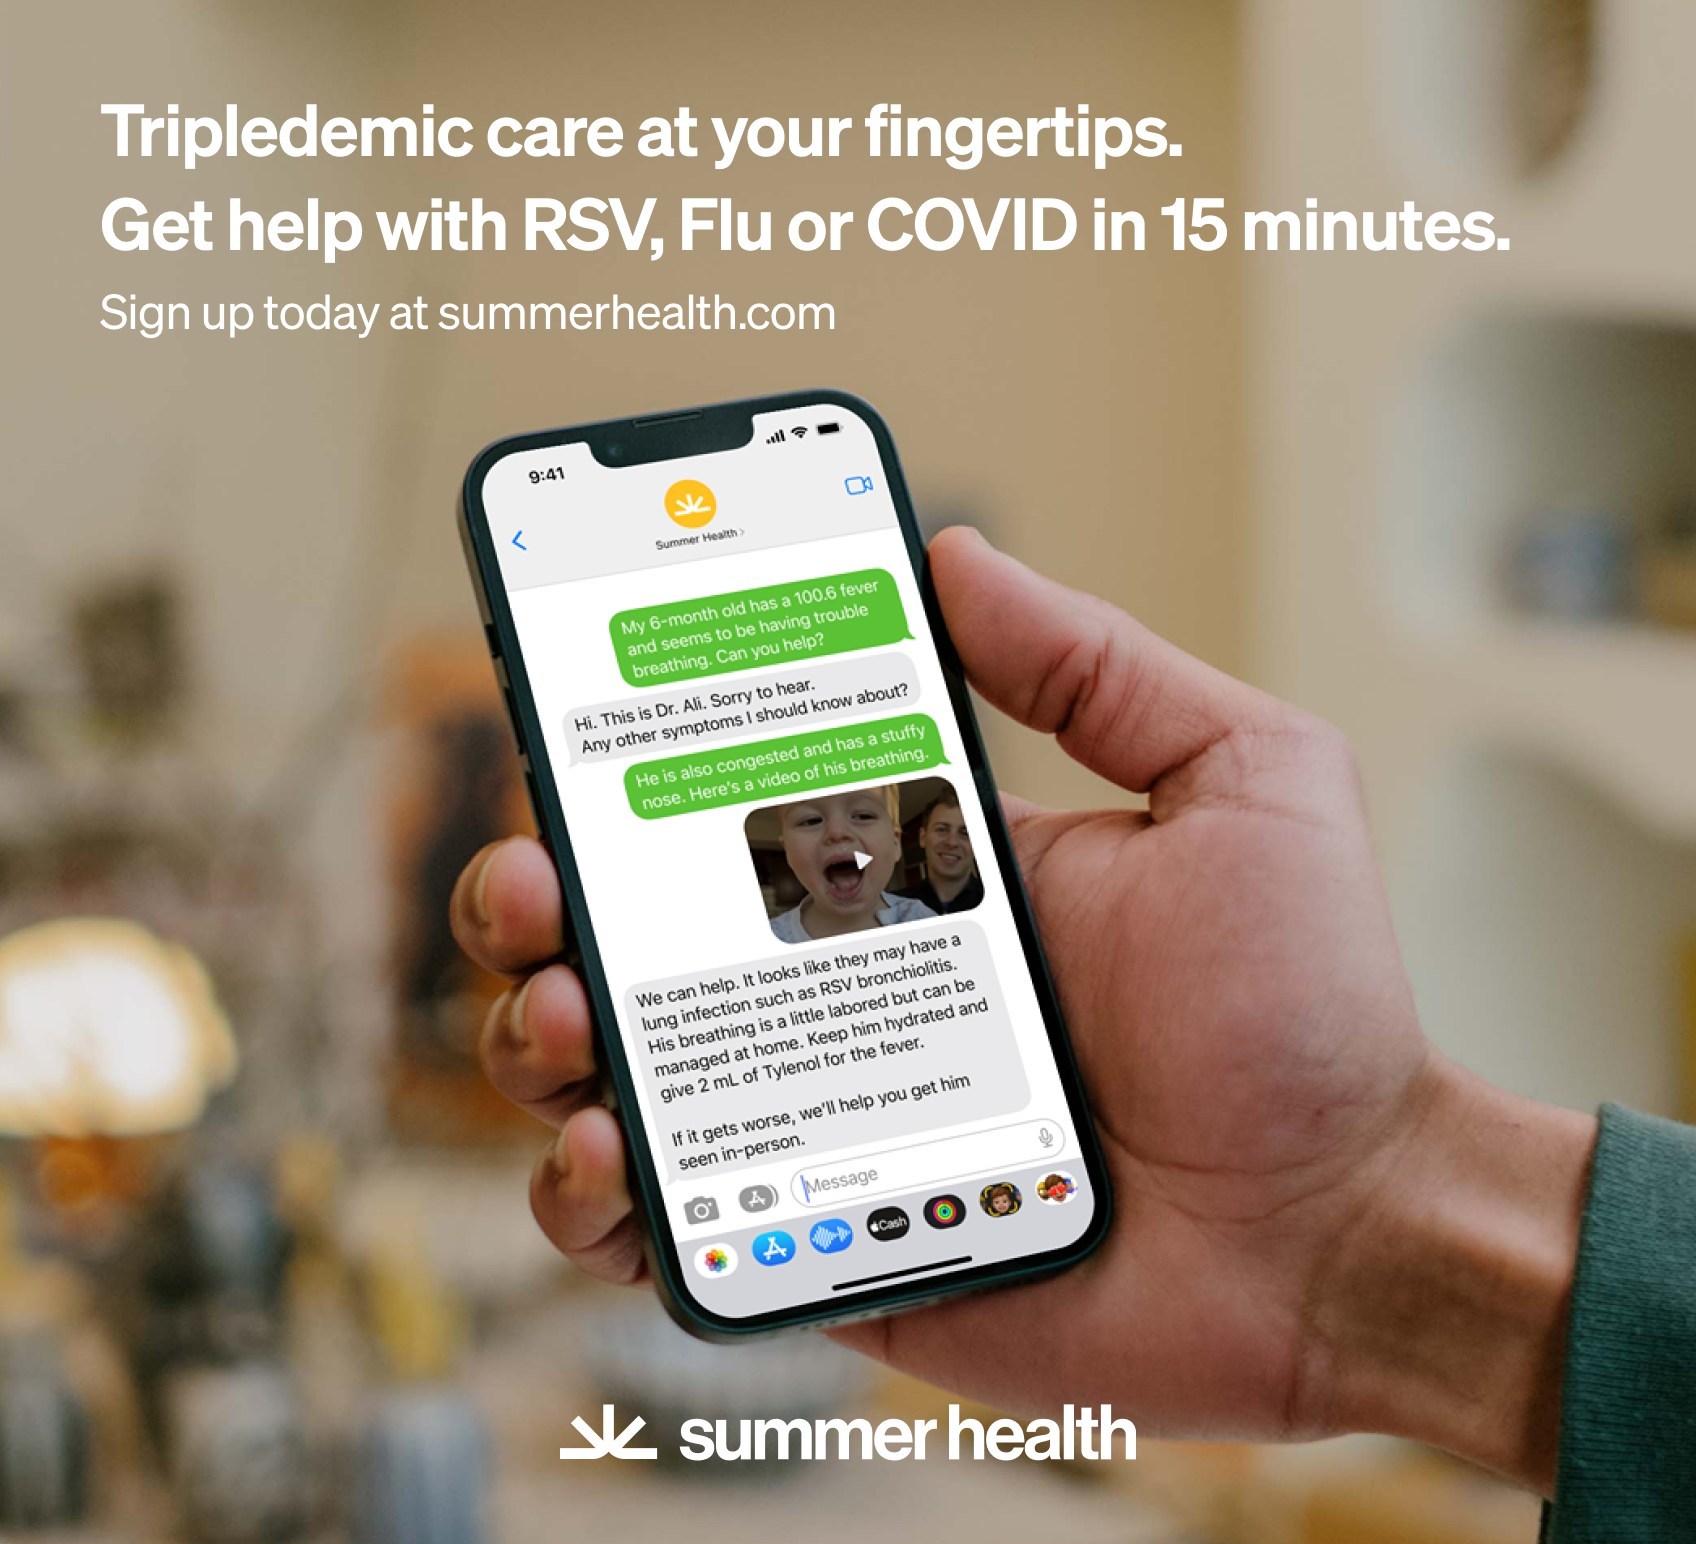 Summer Health Adds Messaging-Based Pediatric Care Initiative to Combat the RSV, Flu, and COVID "Tripledemic"